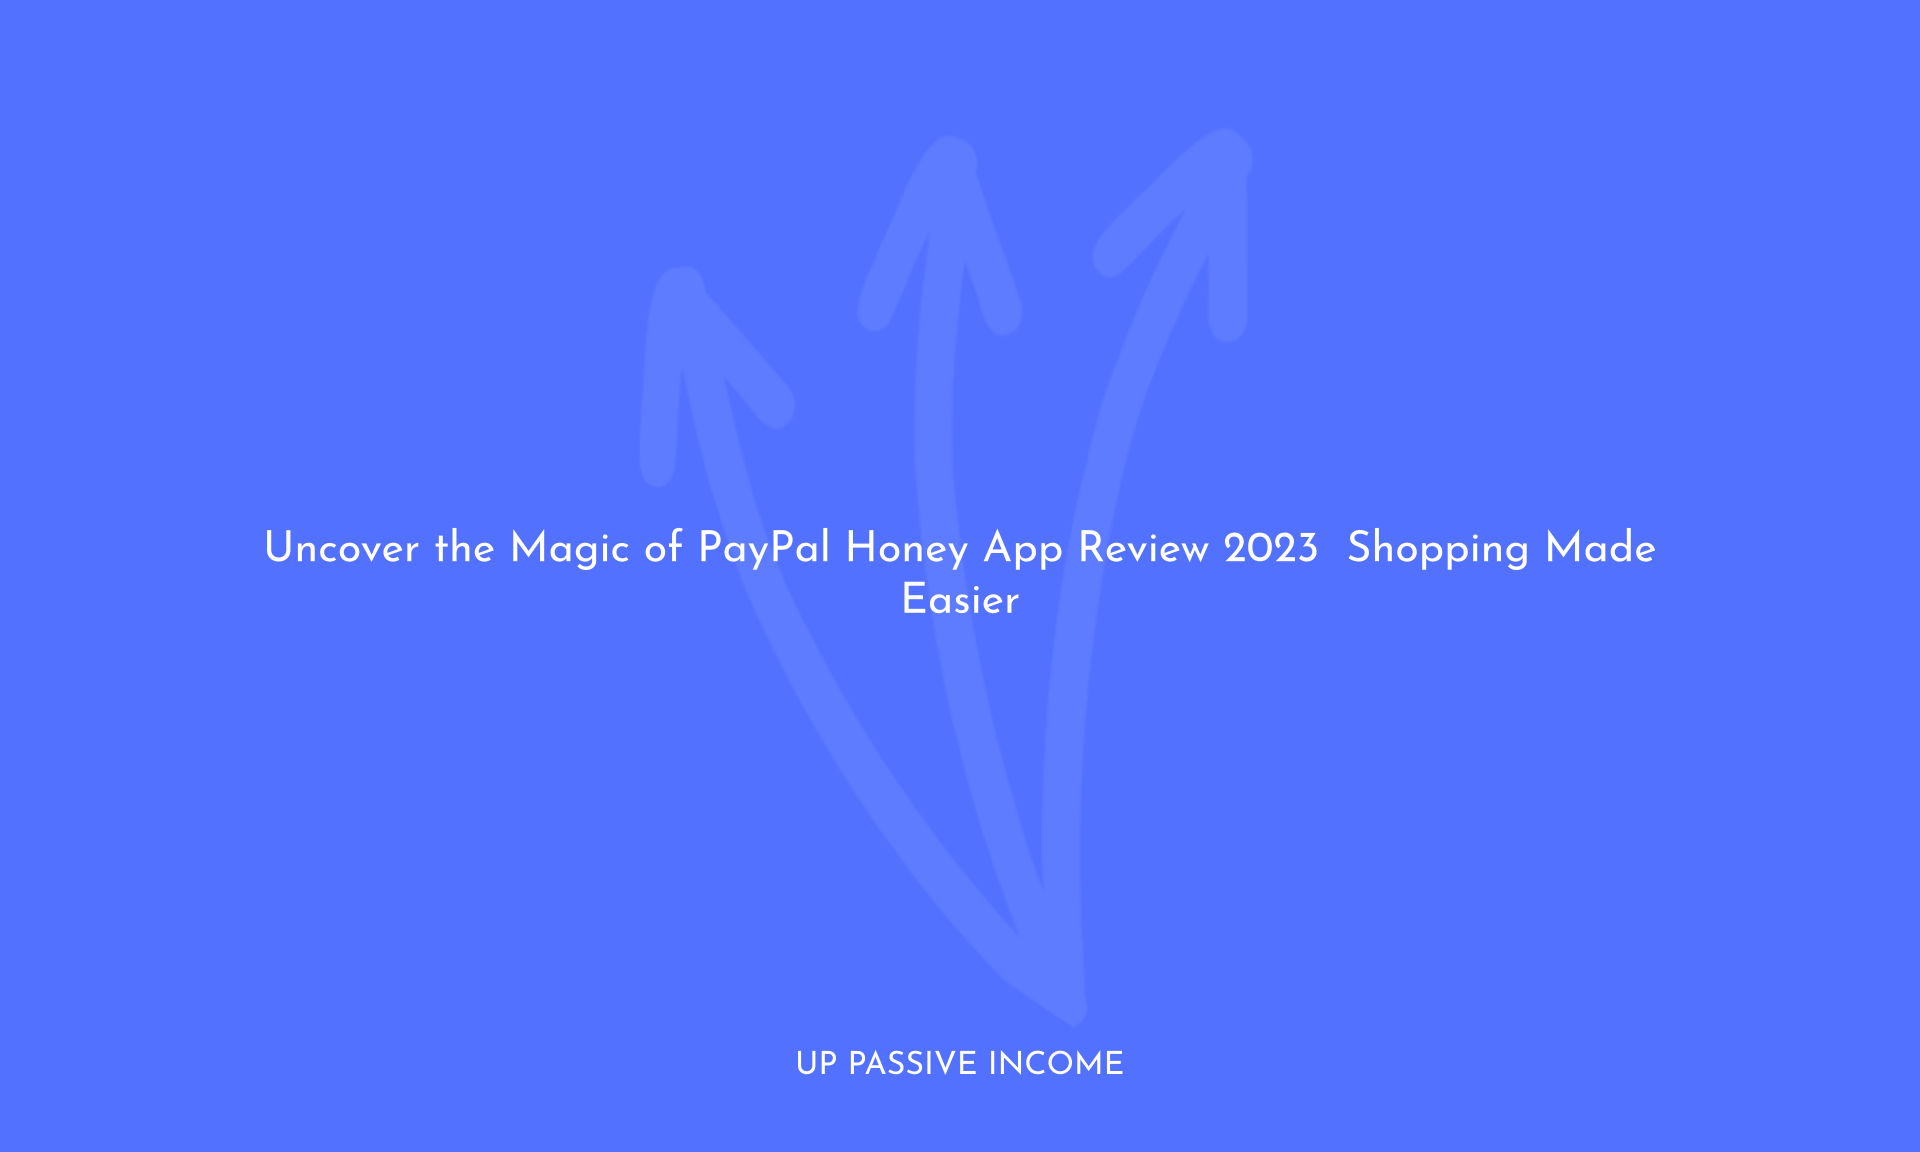 PayPal Honey app review 2023